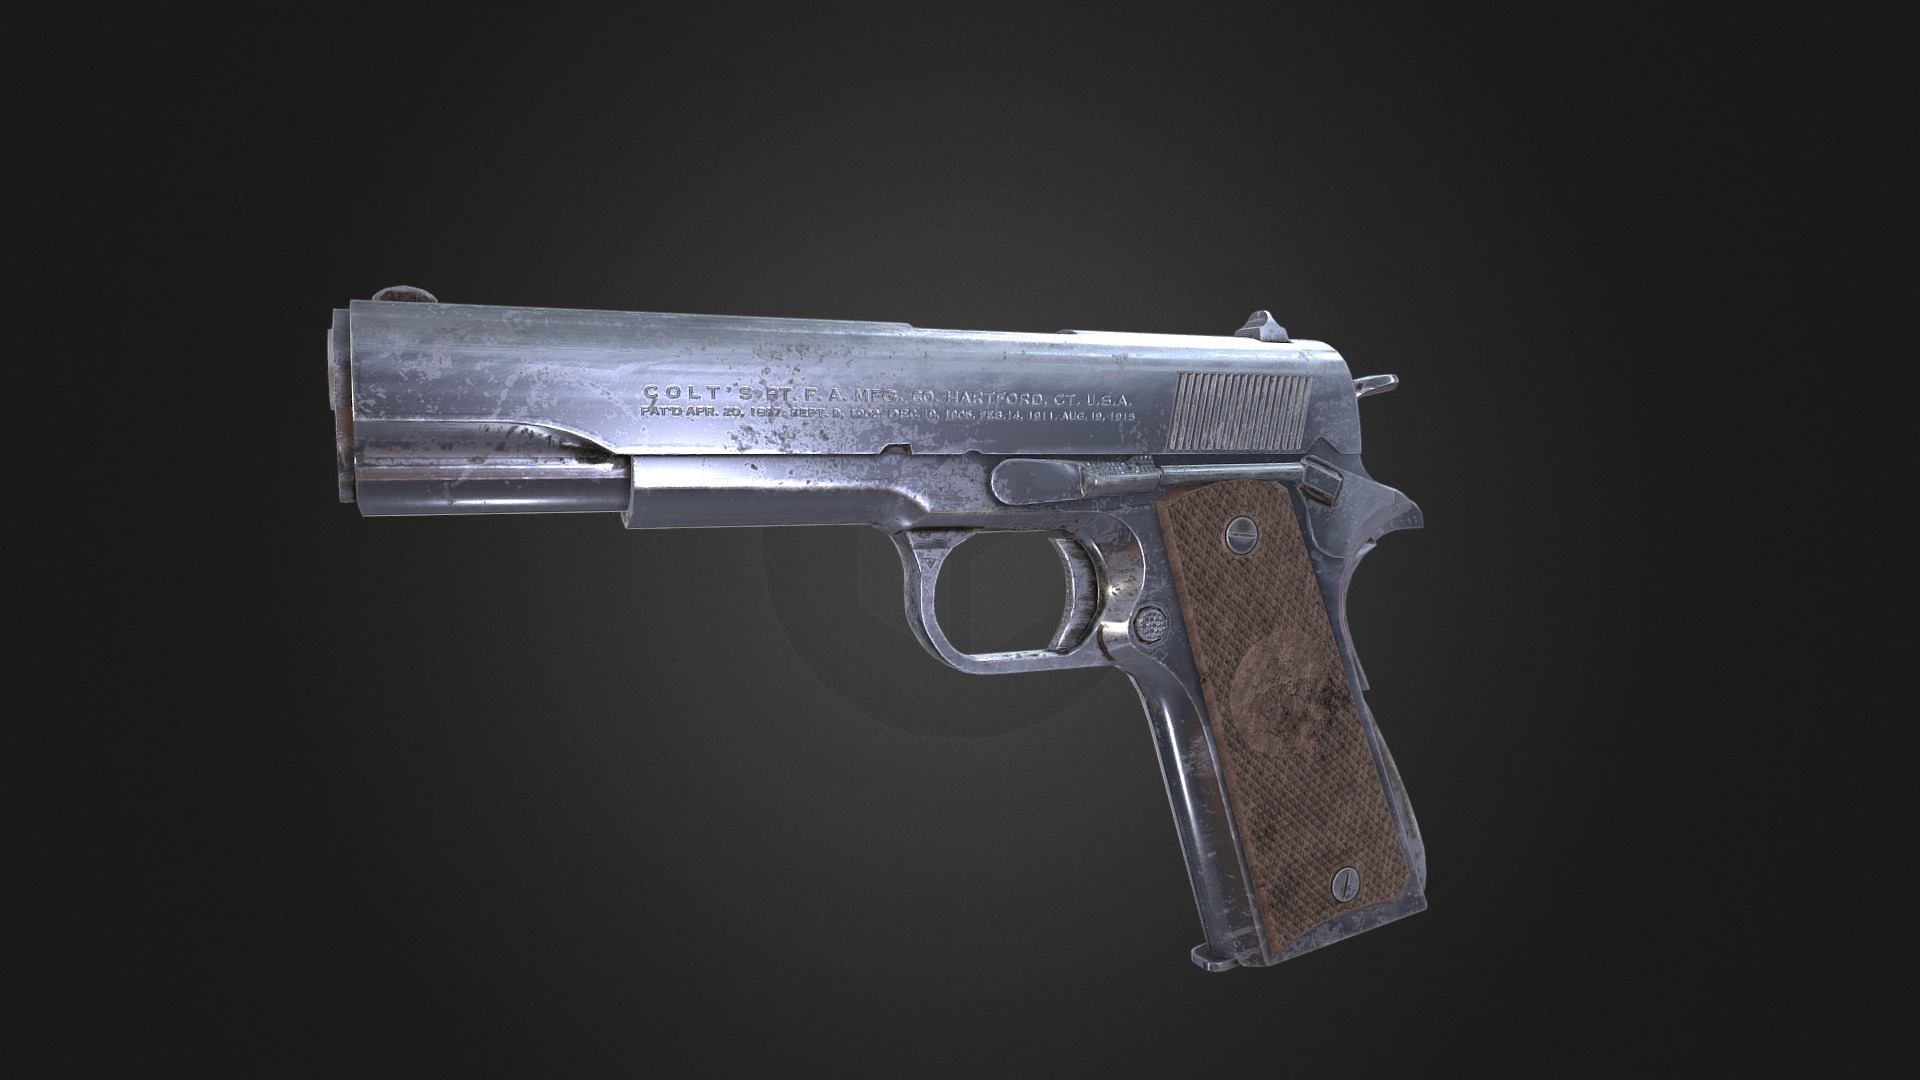 M1911 A1 Pistol Completed